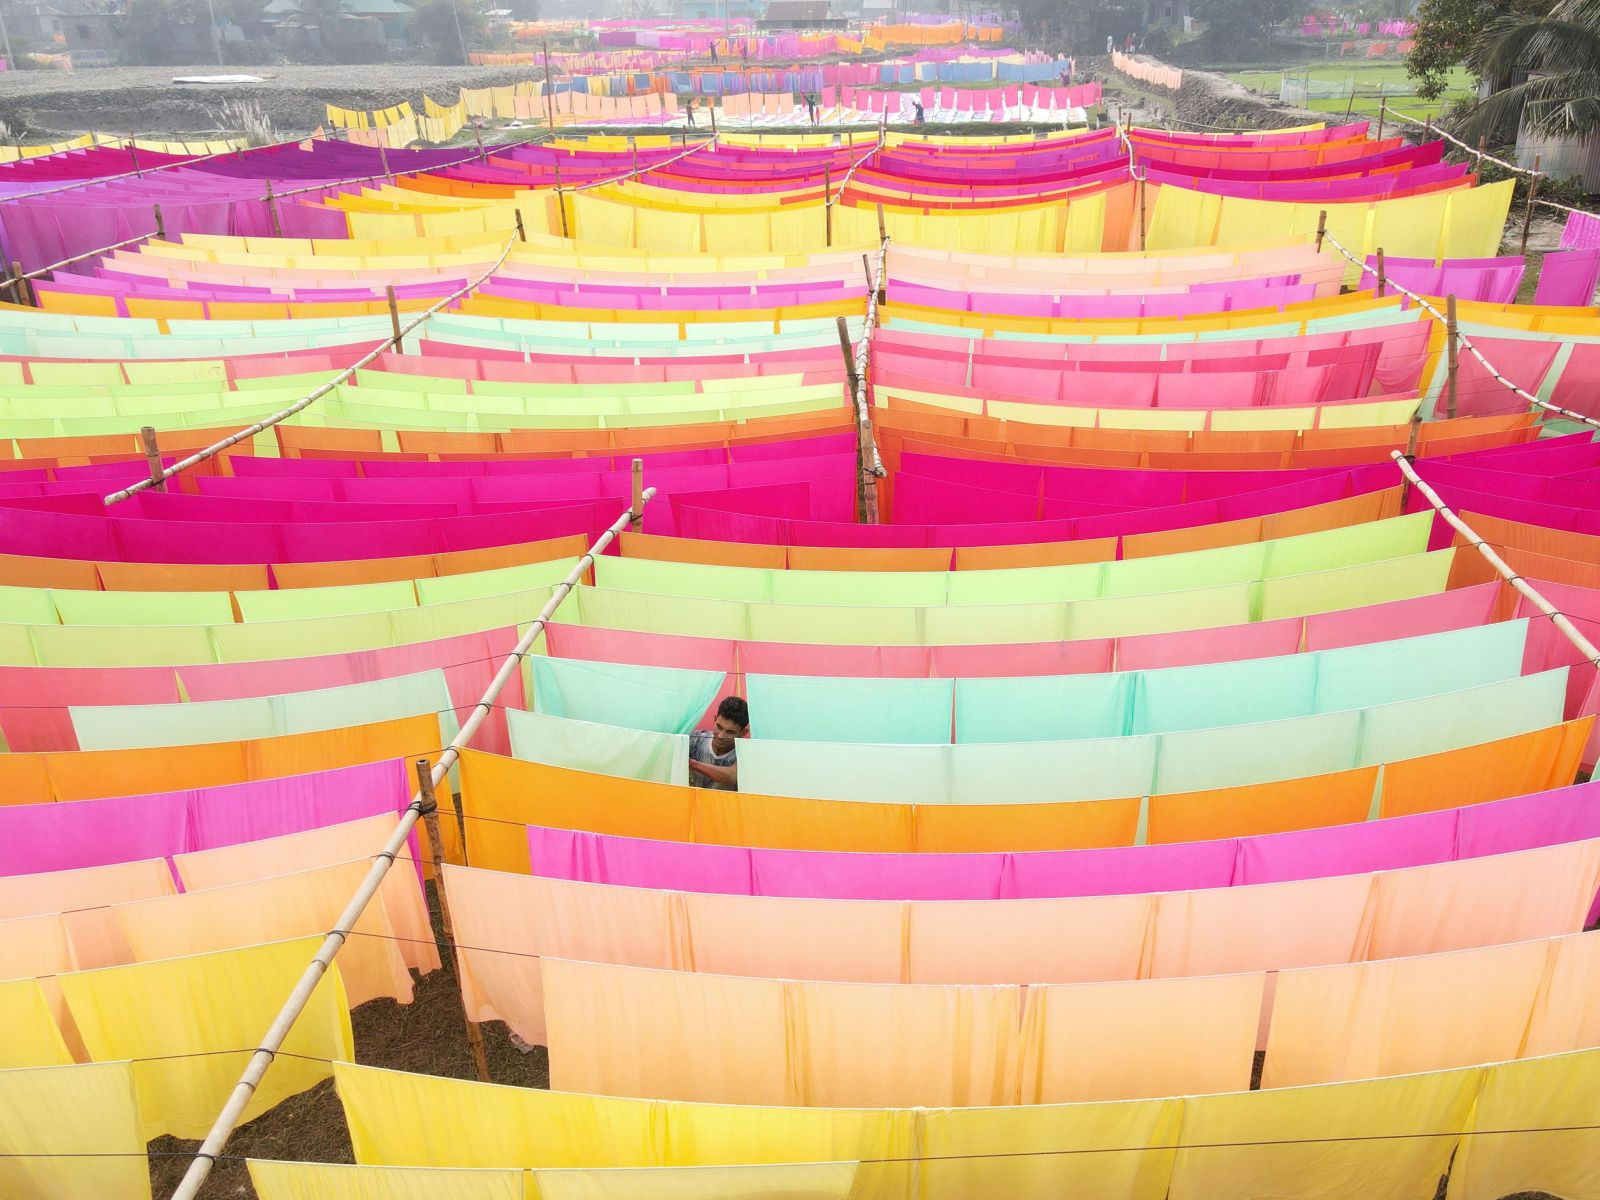 Dyeing processes typically involve over 1,600 different chemicals: drying textiles at a factory in Bangladesh.